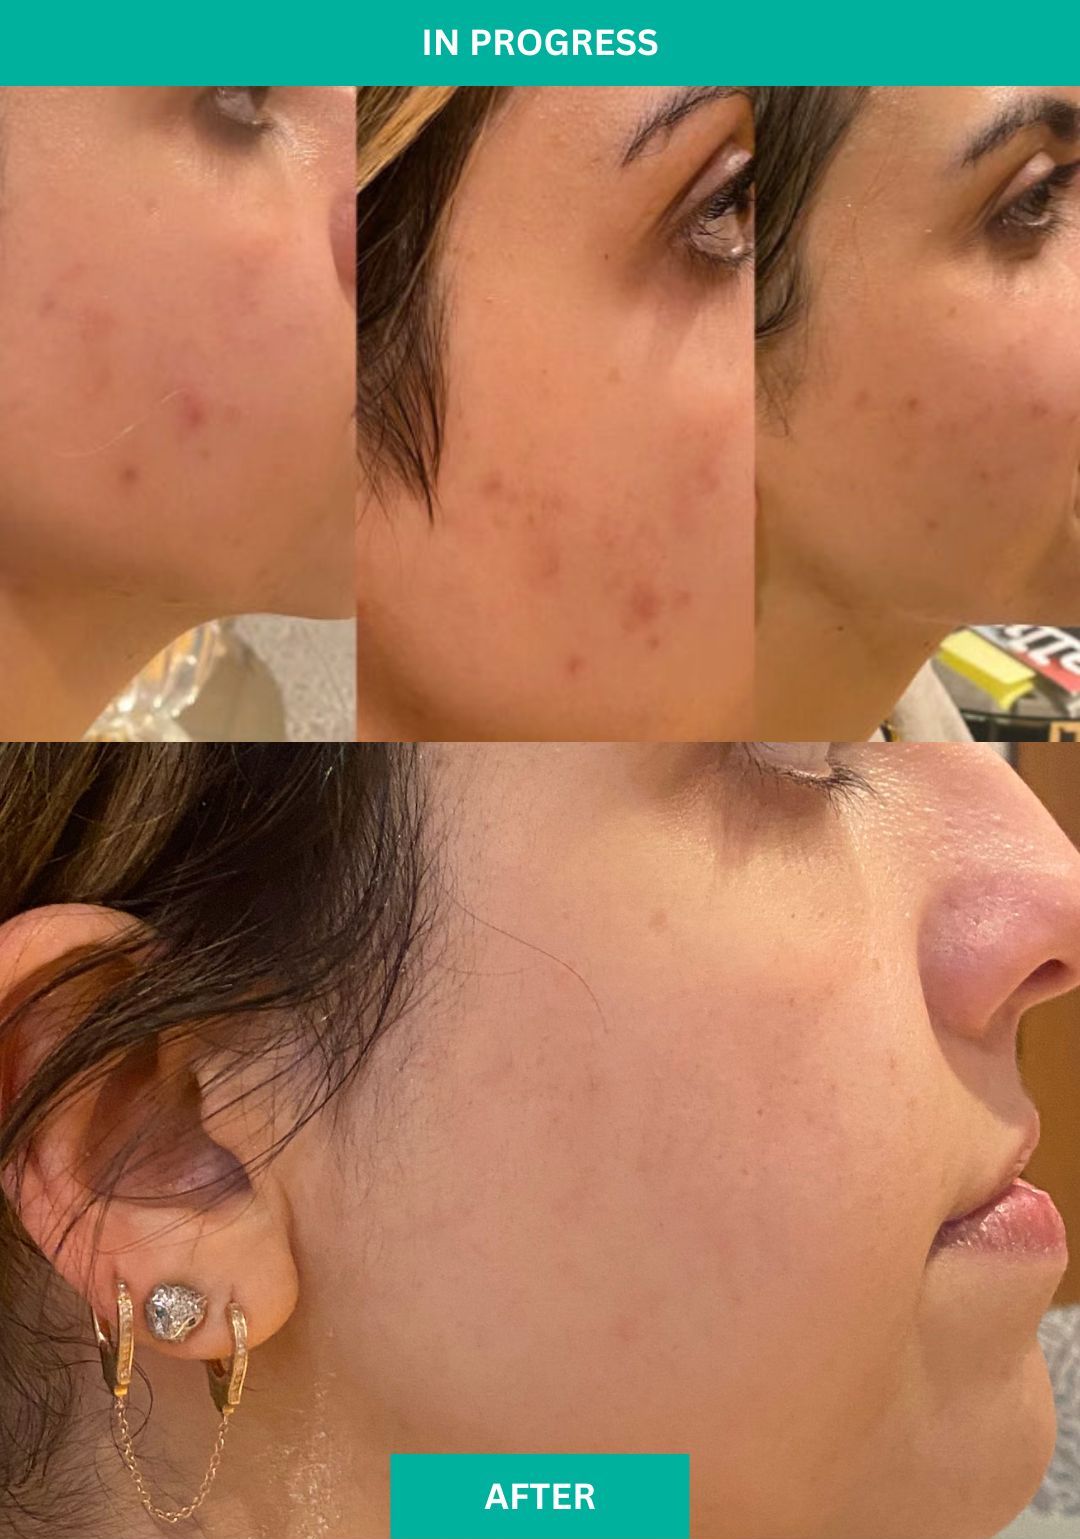 Progress Not Perfection - Tracking Acne Skin Therapy at VERABELLA